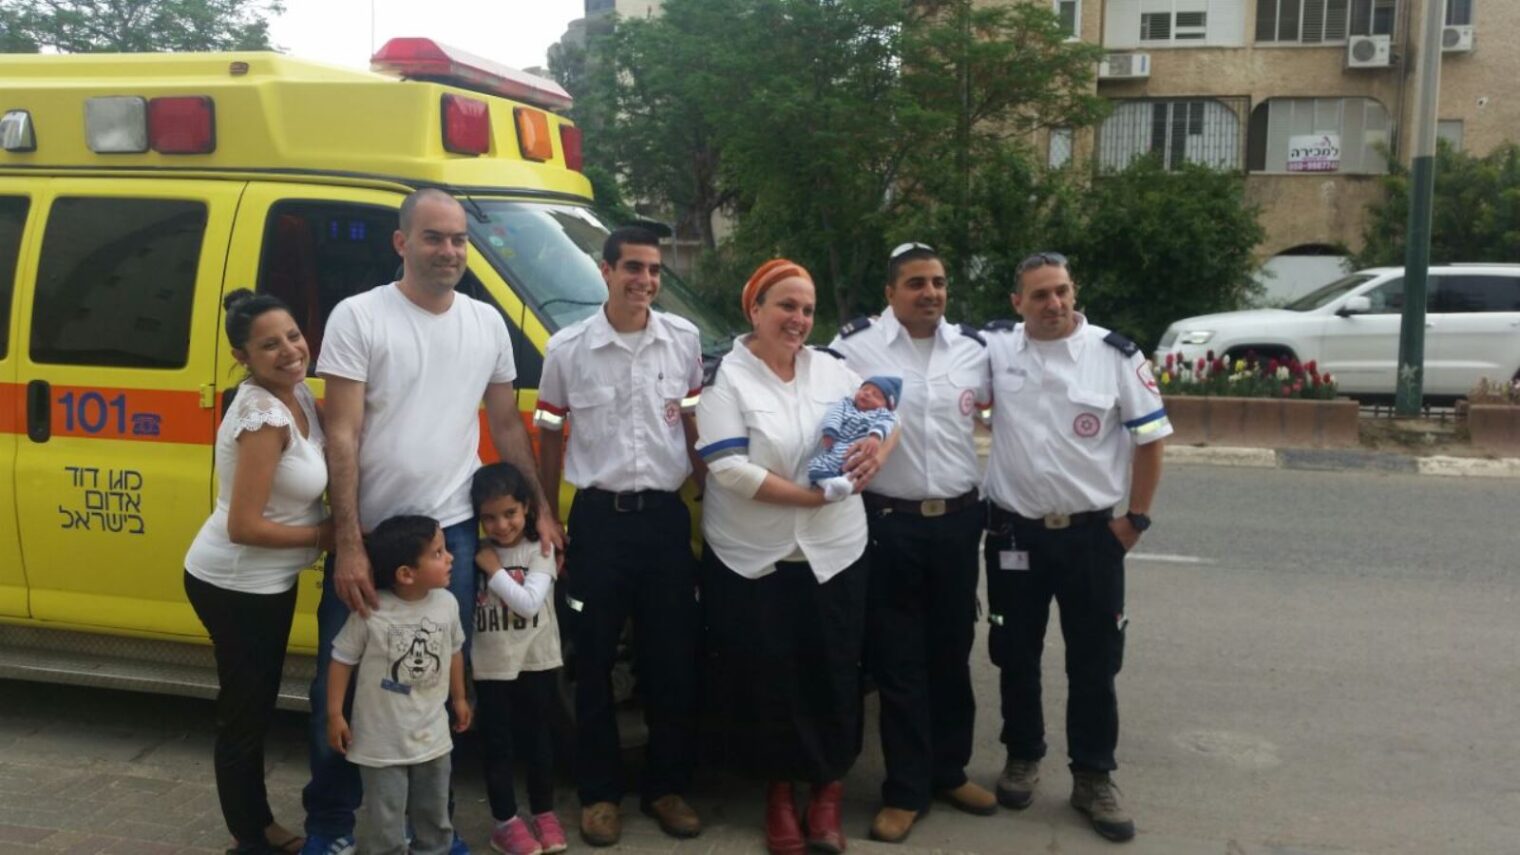 From left, the Sabag family with the crew that delivered their newest addition: Adi Rachamim, Orit Ochana, Nati Liani and Yossi Akris. Photo by MDA Spokesman